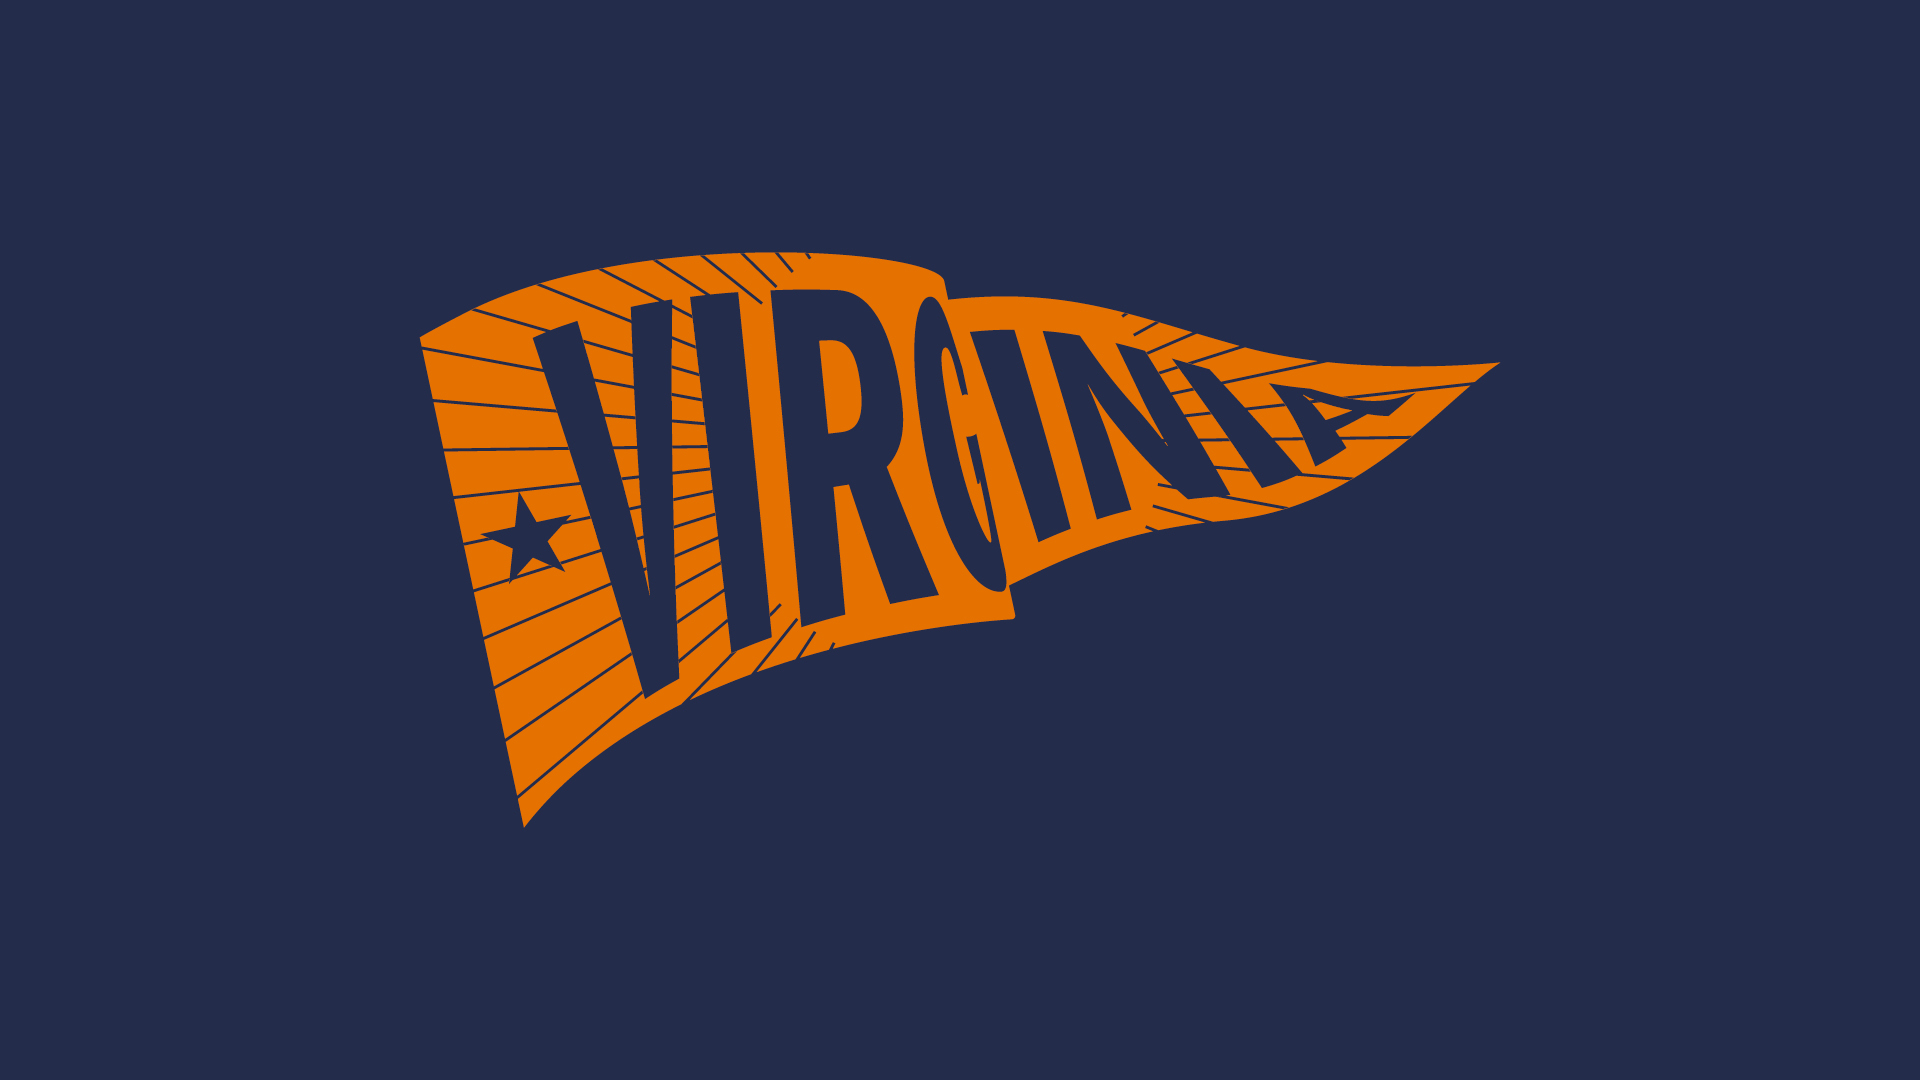 Dark blue background with a illustrated pennant flag with the word Virginia on it